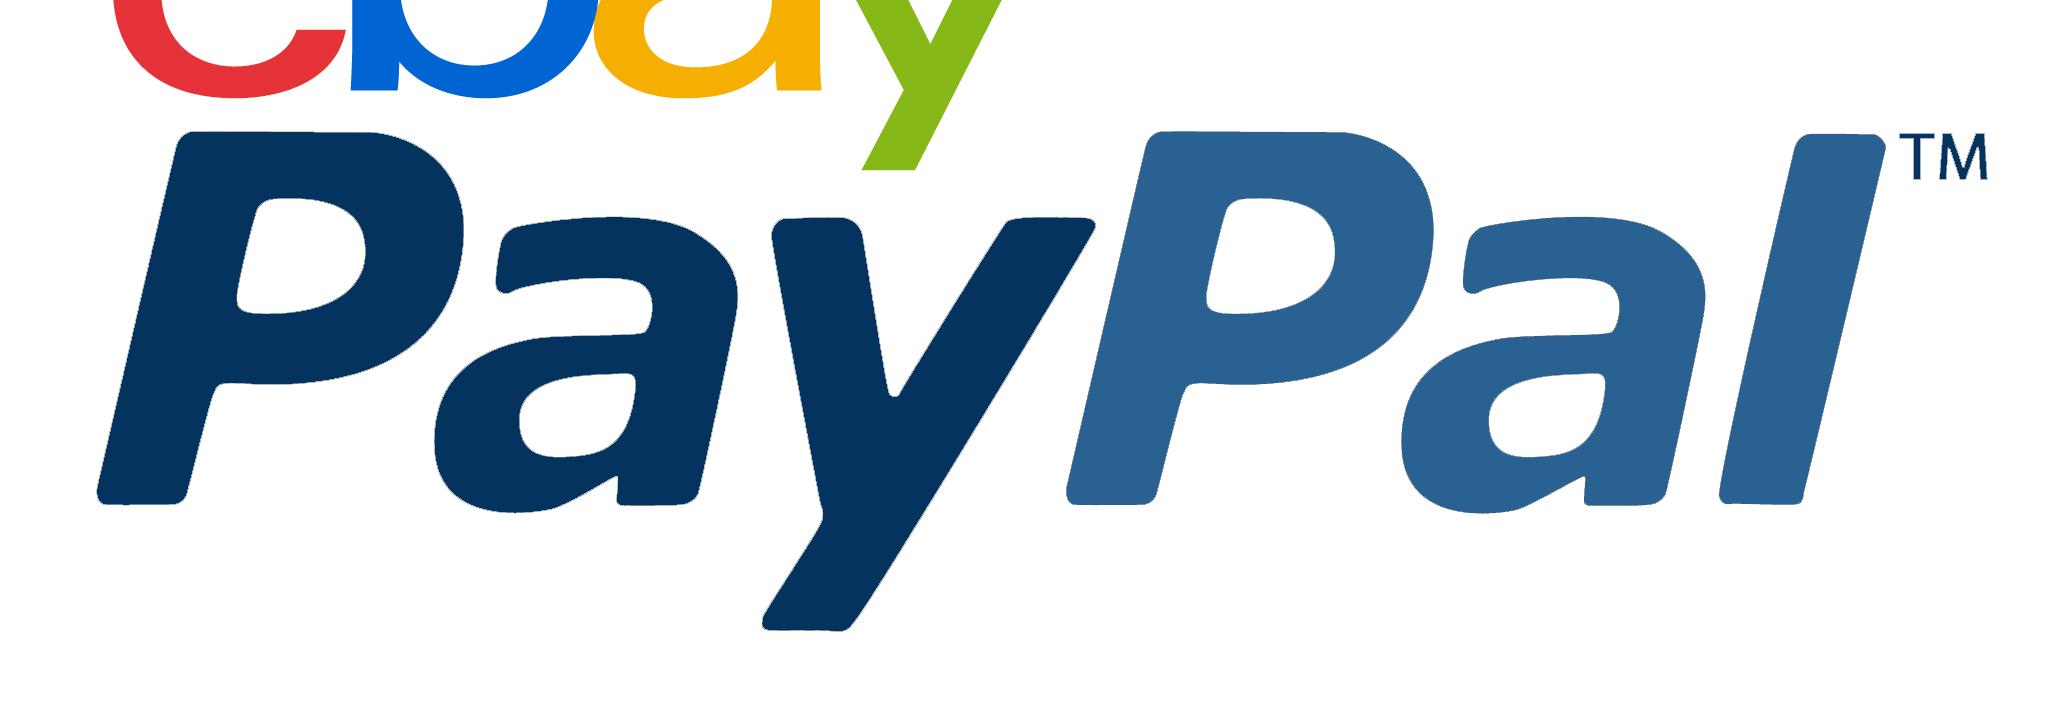 eBay PayPal Logo - eBay To Spin Off PayPal So They Can Compete Against Each Other